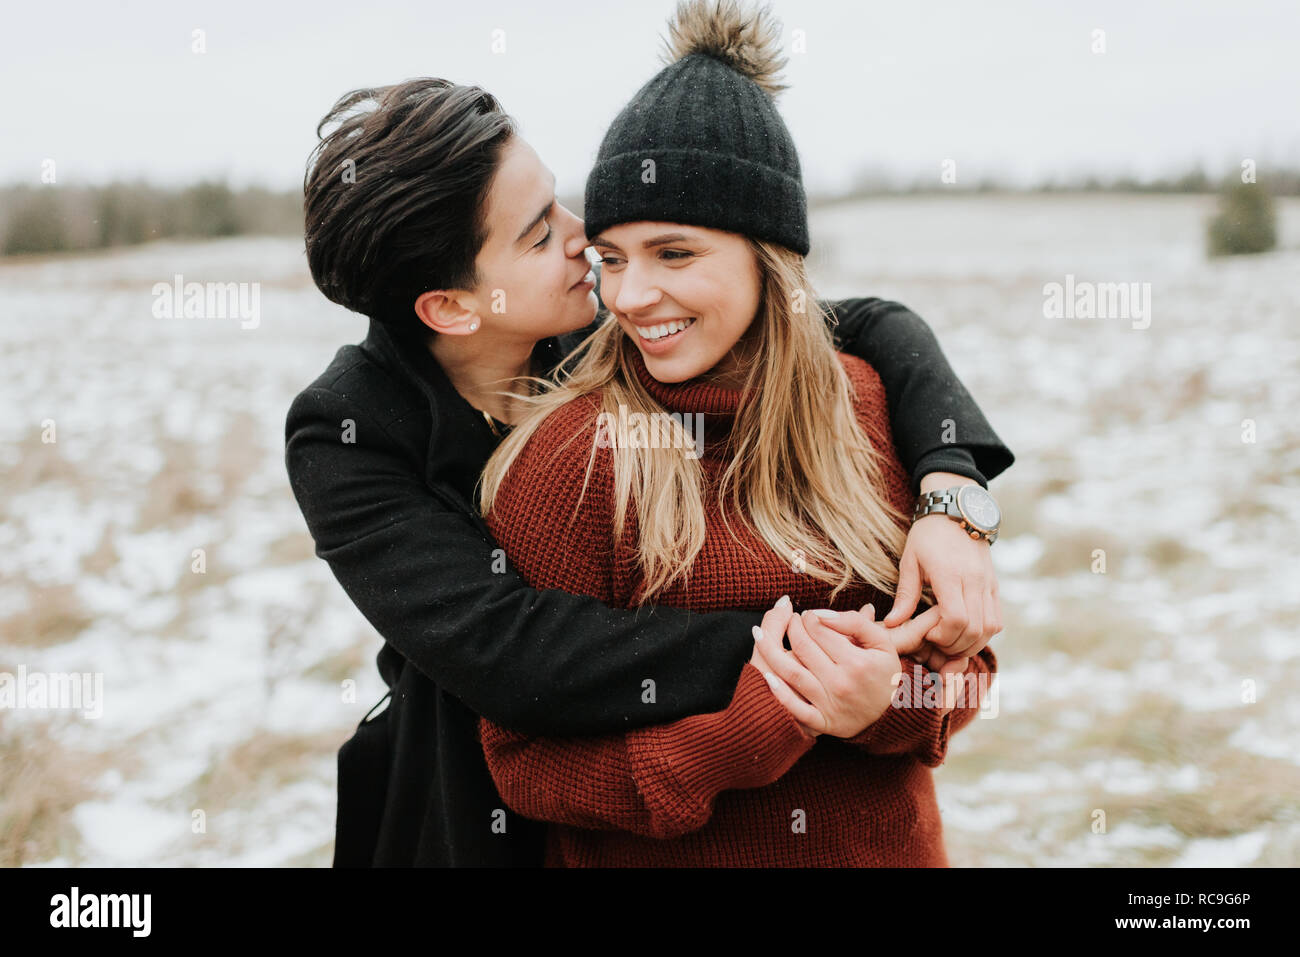 Couple hugging in snowy landscape, Georgetown, Canada Banque D'Images